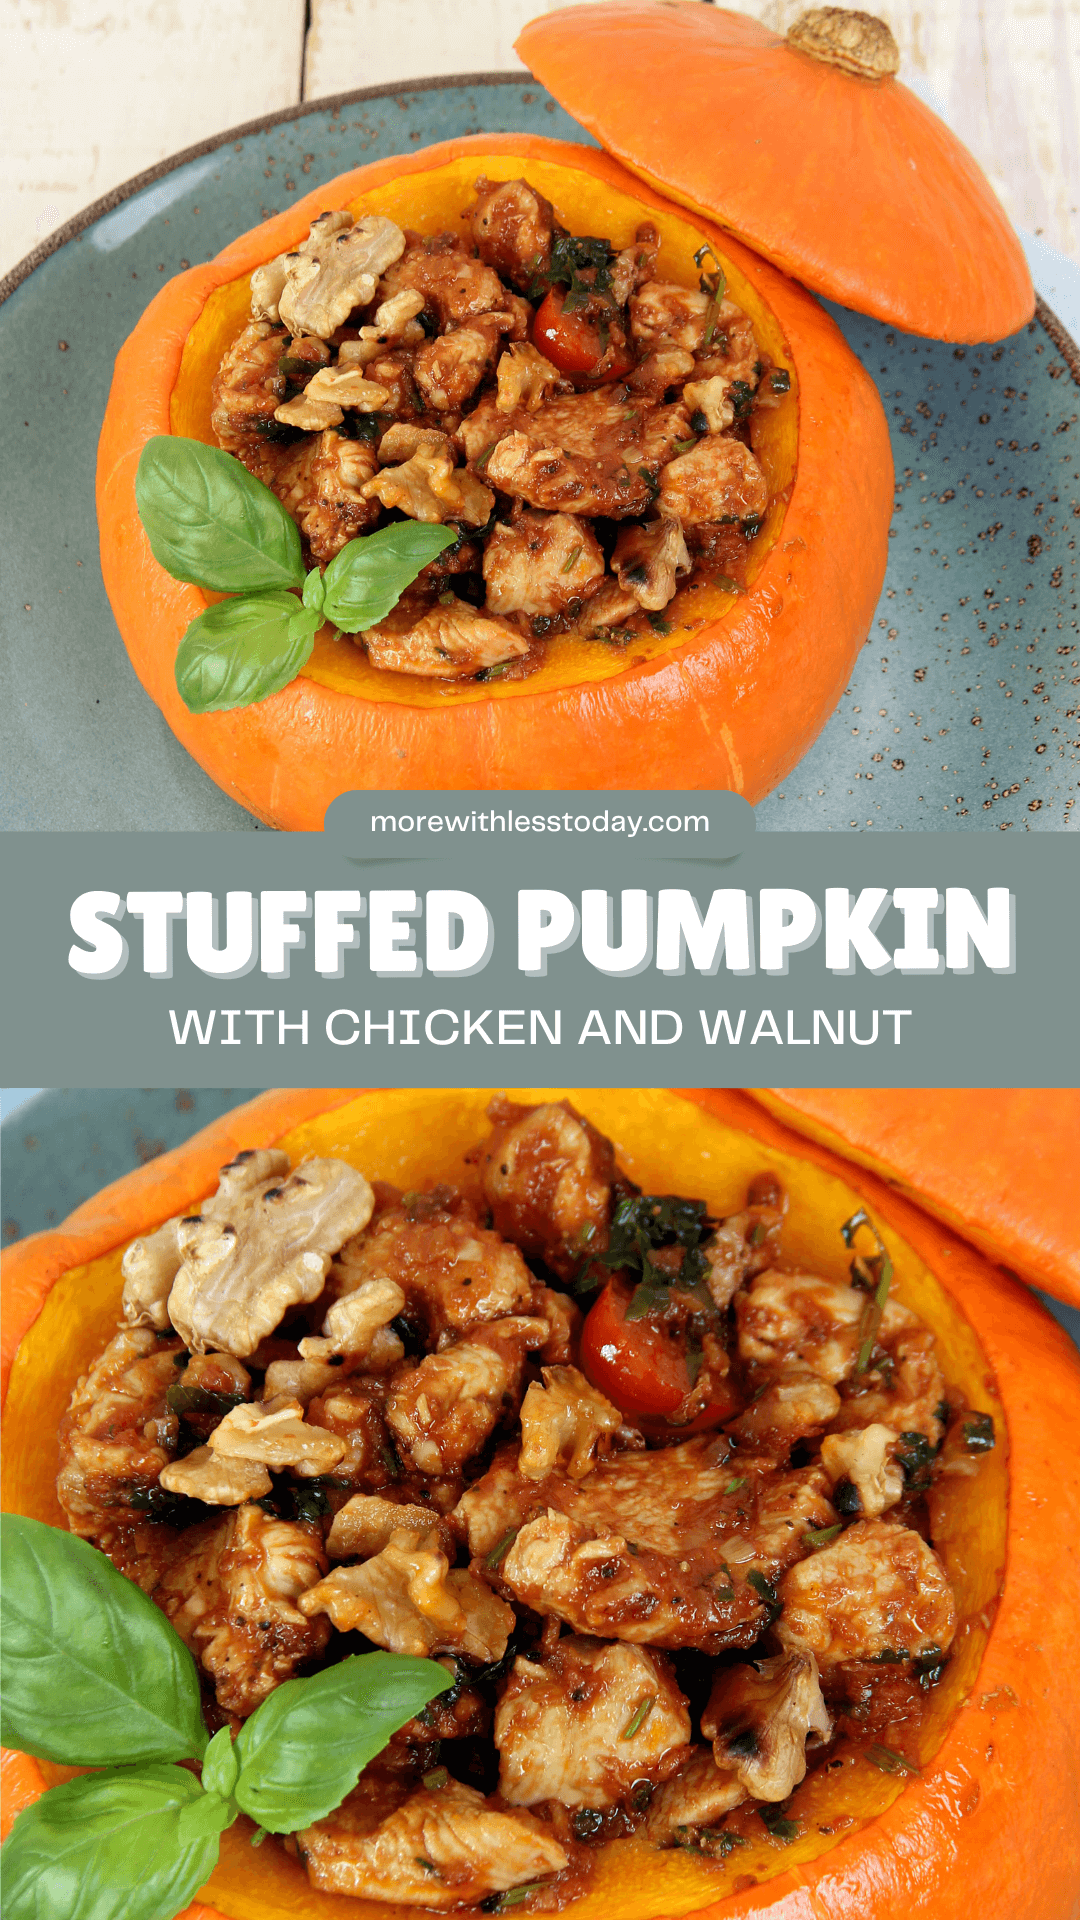 PIN for Stuffed Pumpkin with Chicken and Walnut Recipe